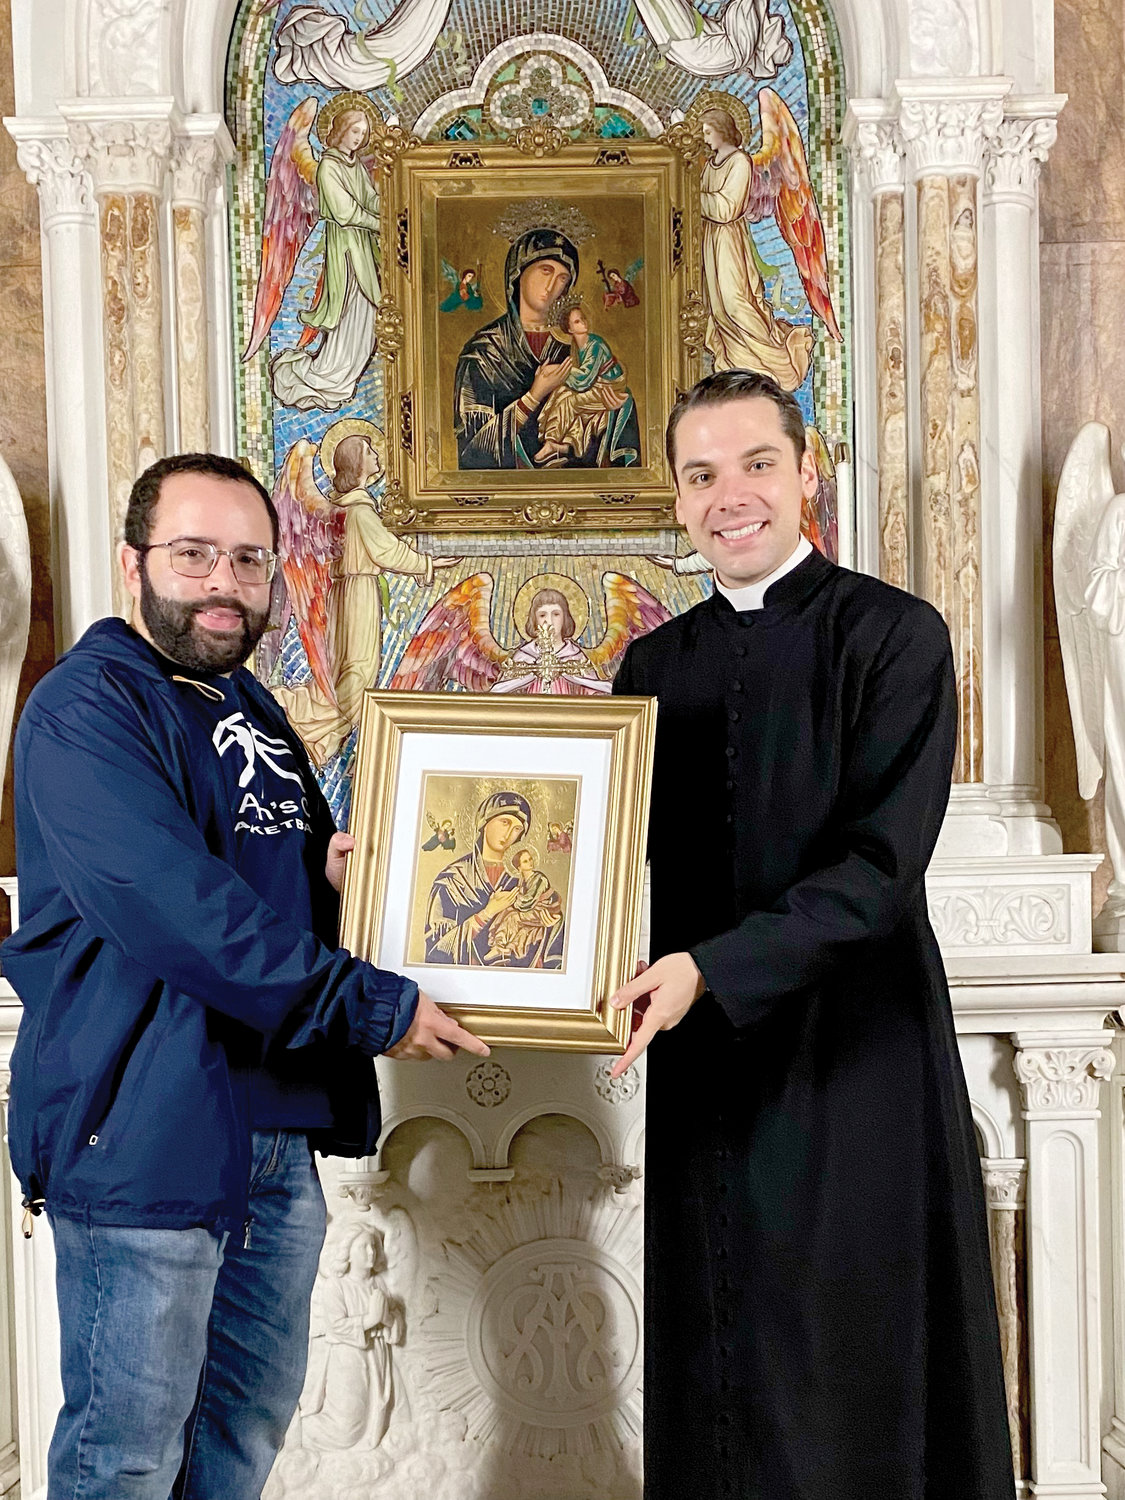 Father Seán Connolly, the administrator of Most Holy Redeemer-Nativity, presents an image of Our Mother of Perpetual Help to Father Rivera as a remembrance of his pilgrimage.